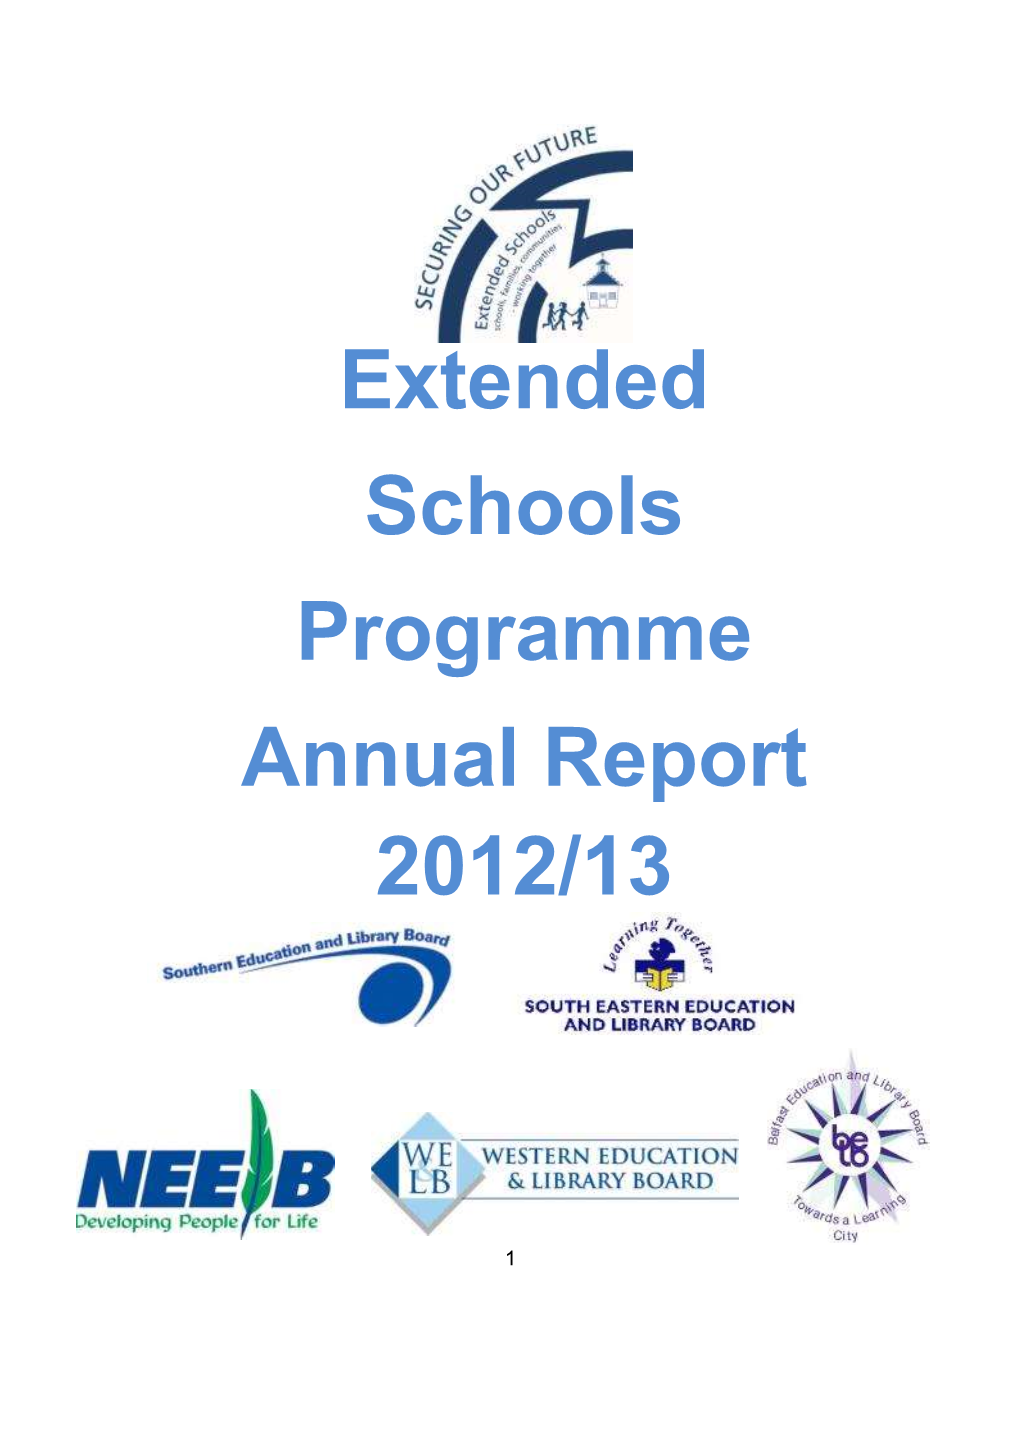 Extended Schools Programme Annual Report 2012/13